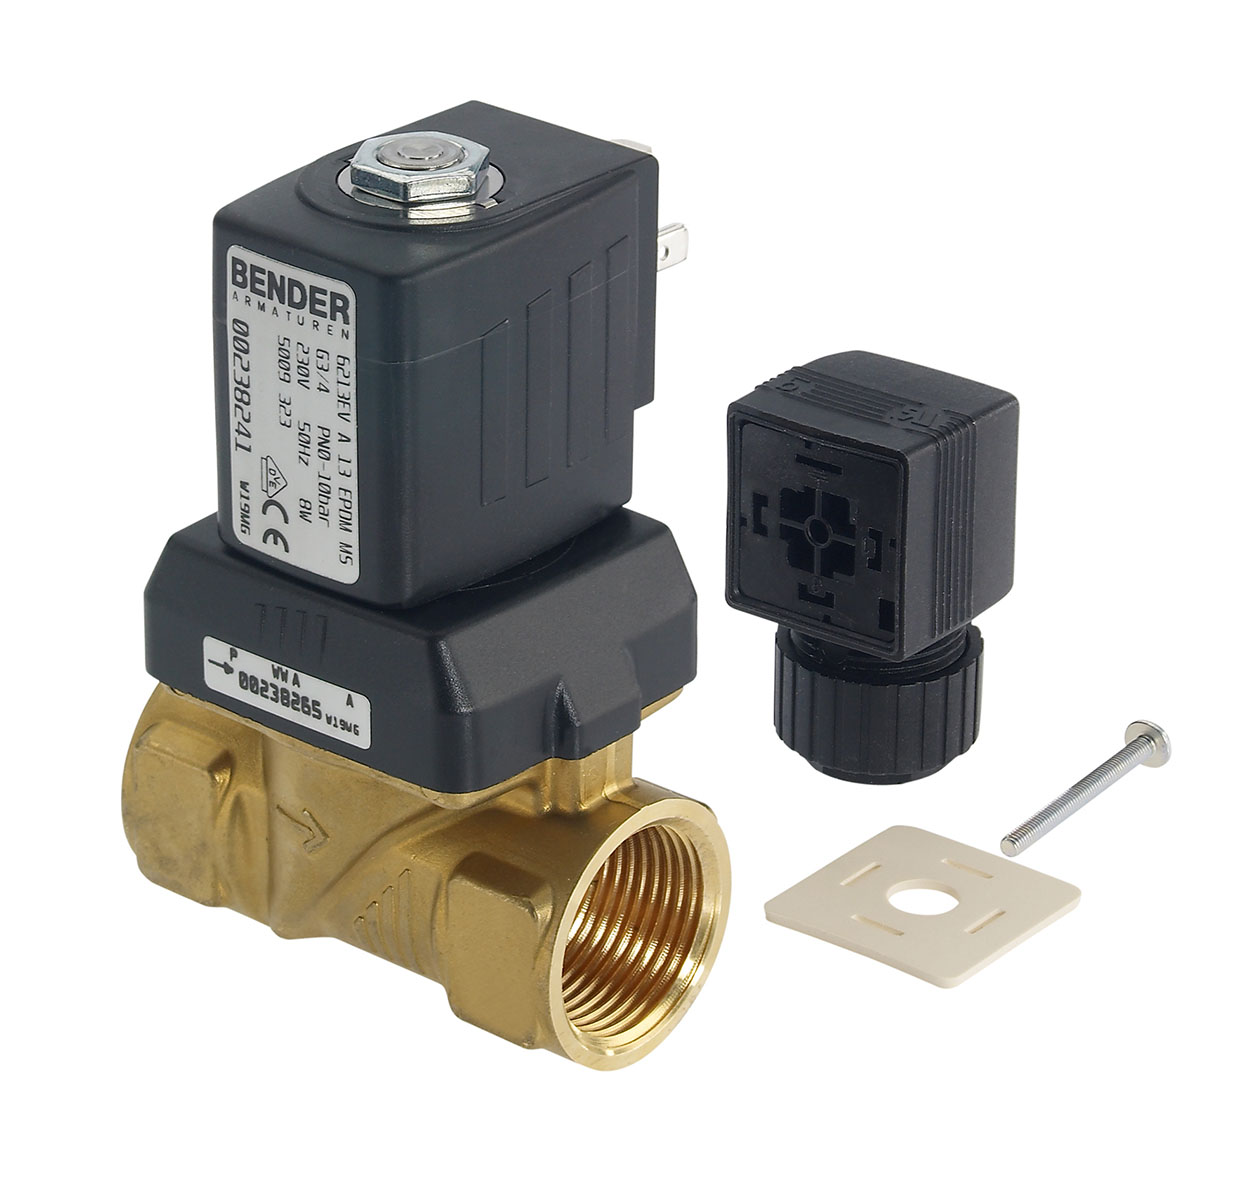 5009303 - 2/2 way solenoidvalve normally closed for fluids Type 1; female thread